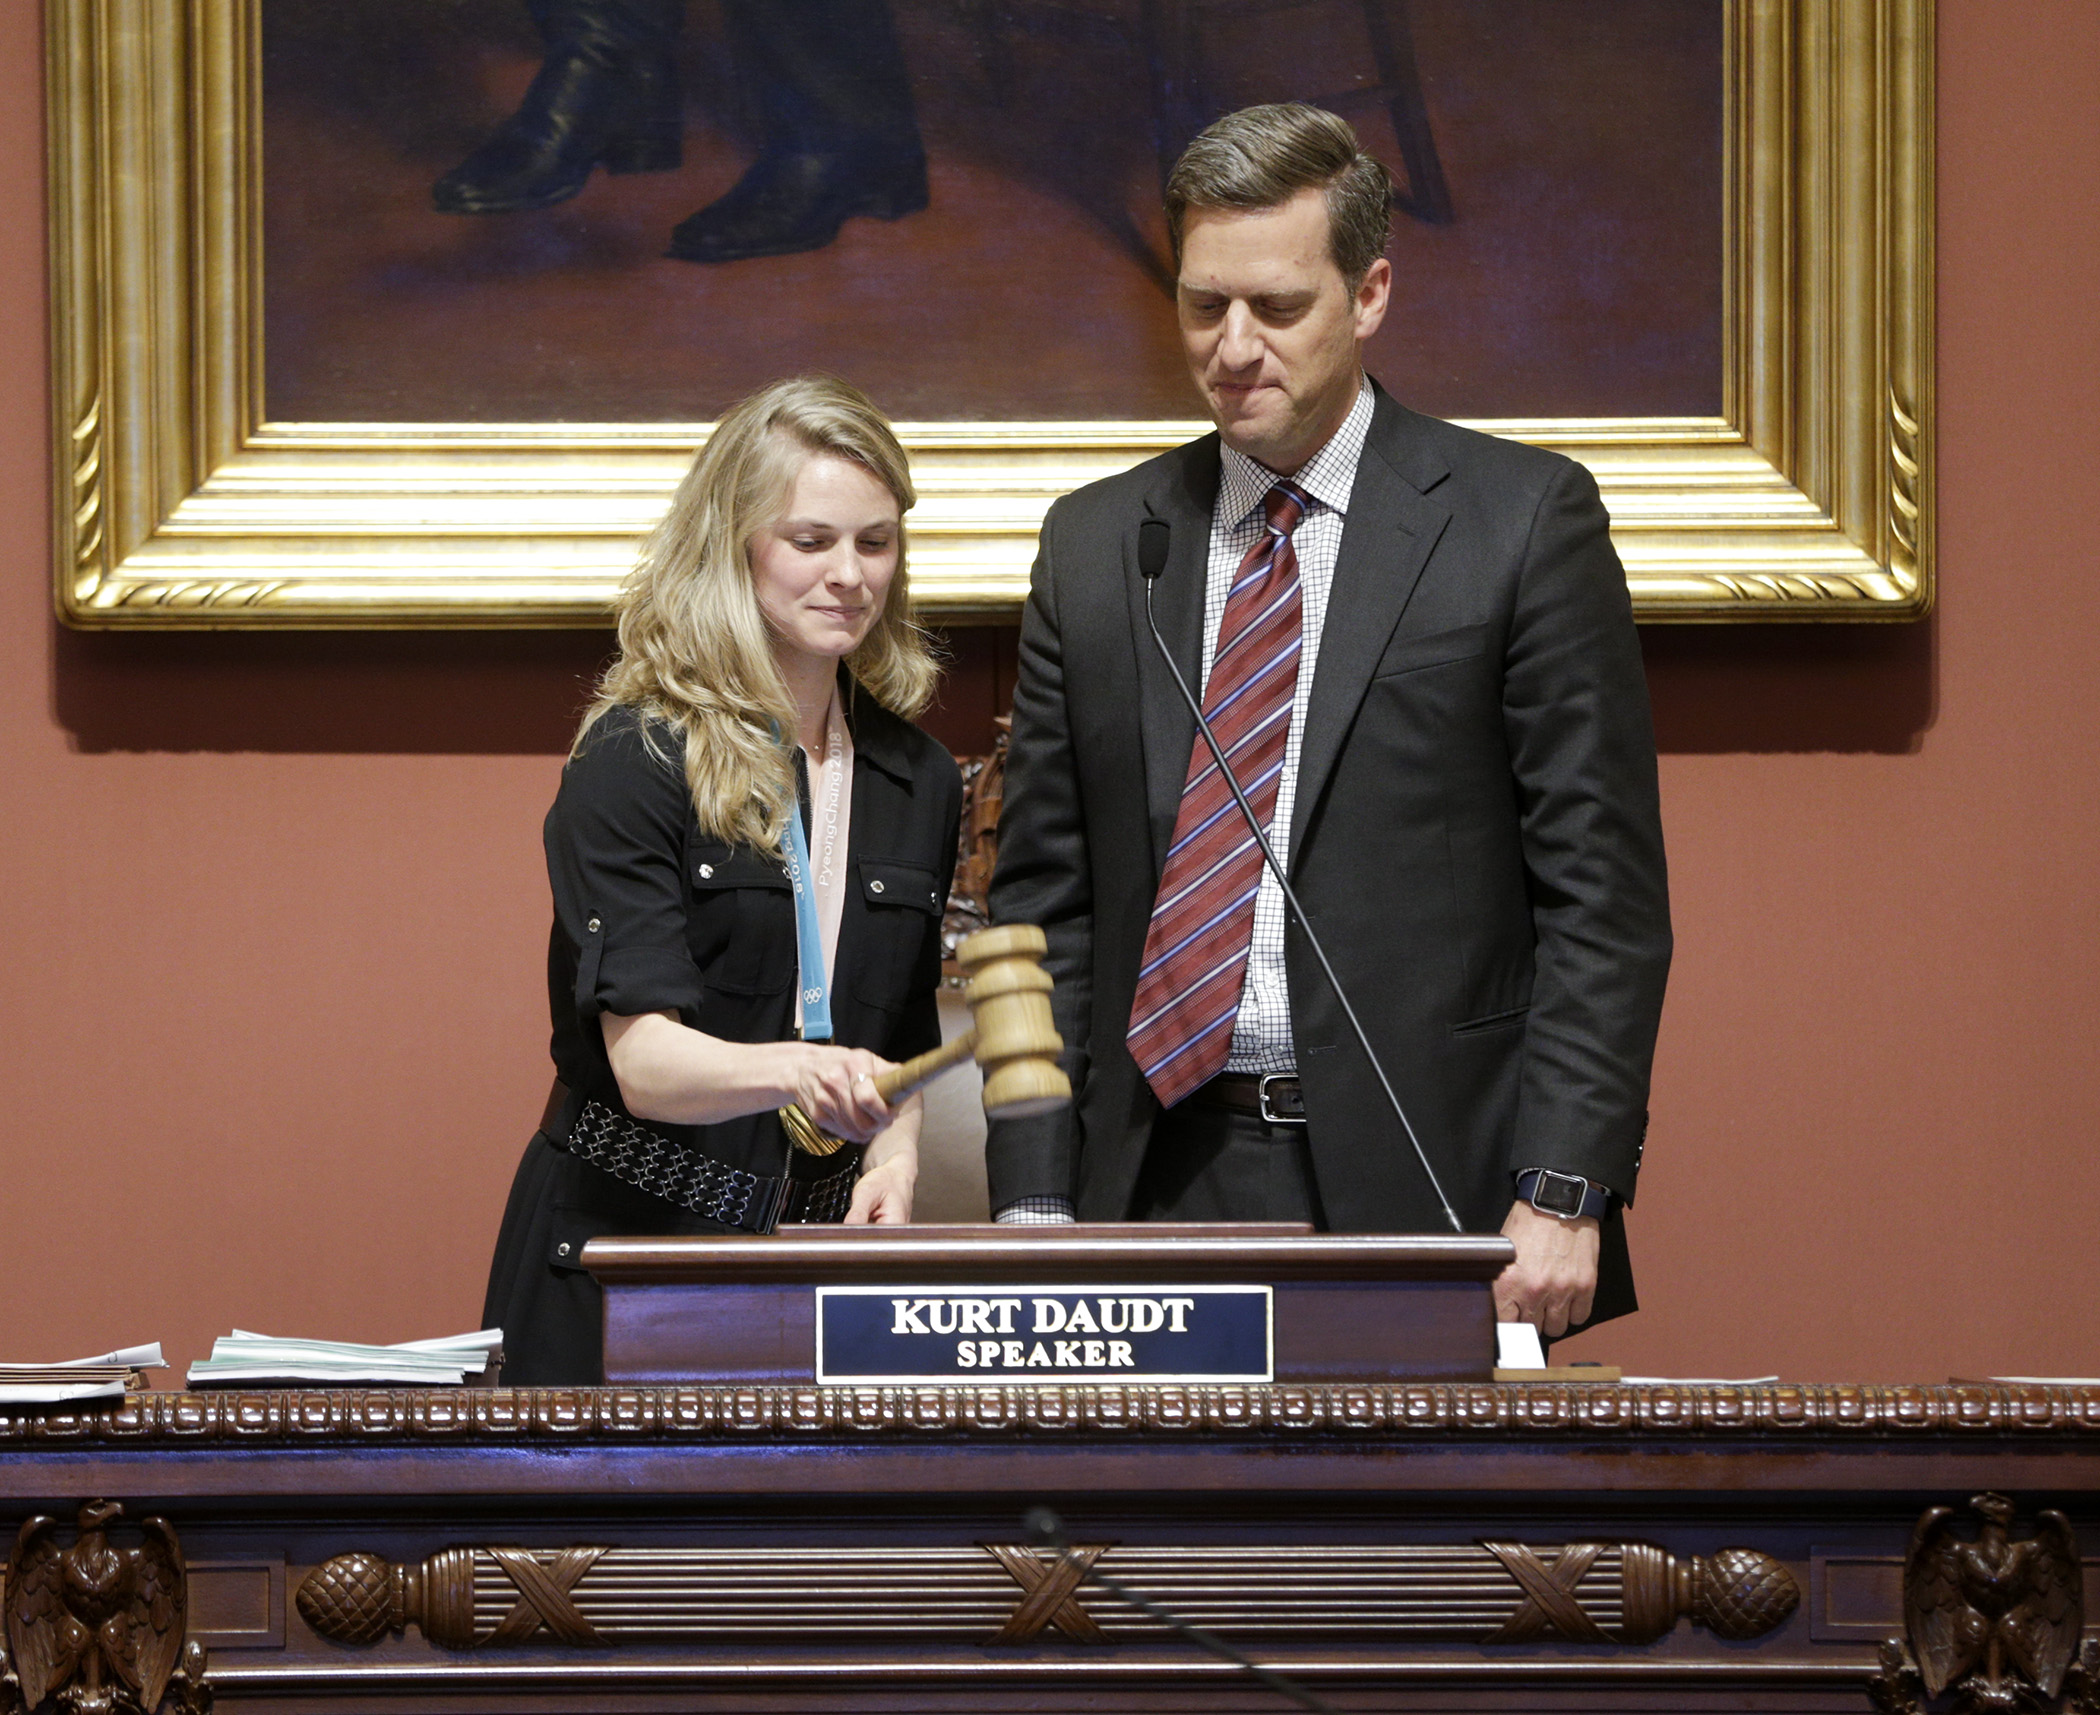 Olympic cross-country skiing gold medalist and Afton native Jessie Diggins gavels in the House floor session April 12 as House Speaker Kurt Daudt looks on. Photo by Paul Battaglia